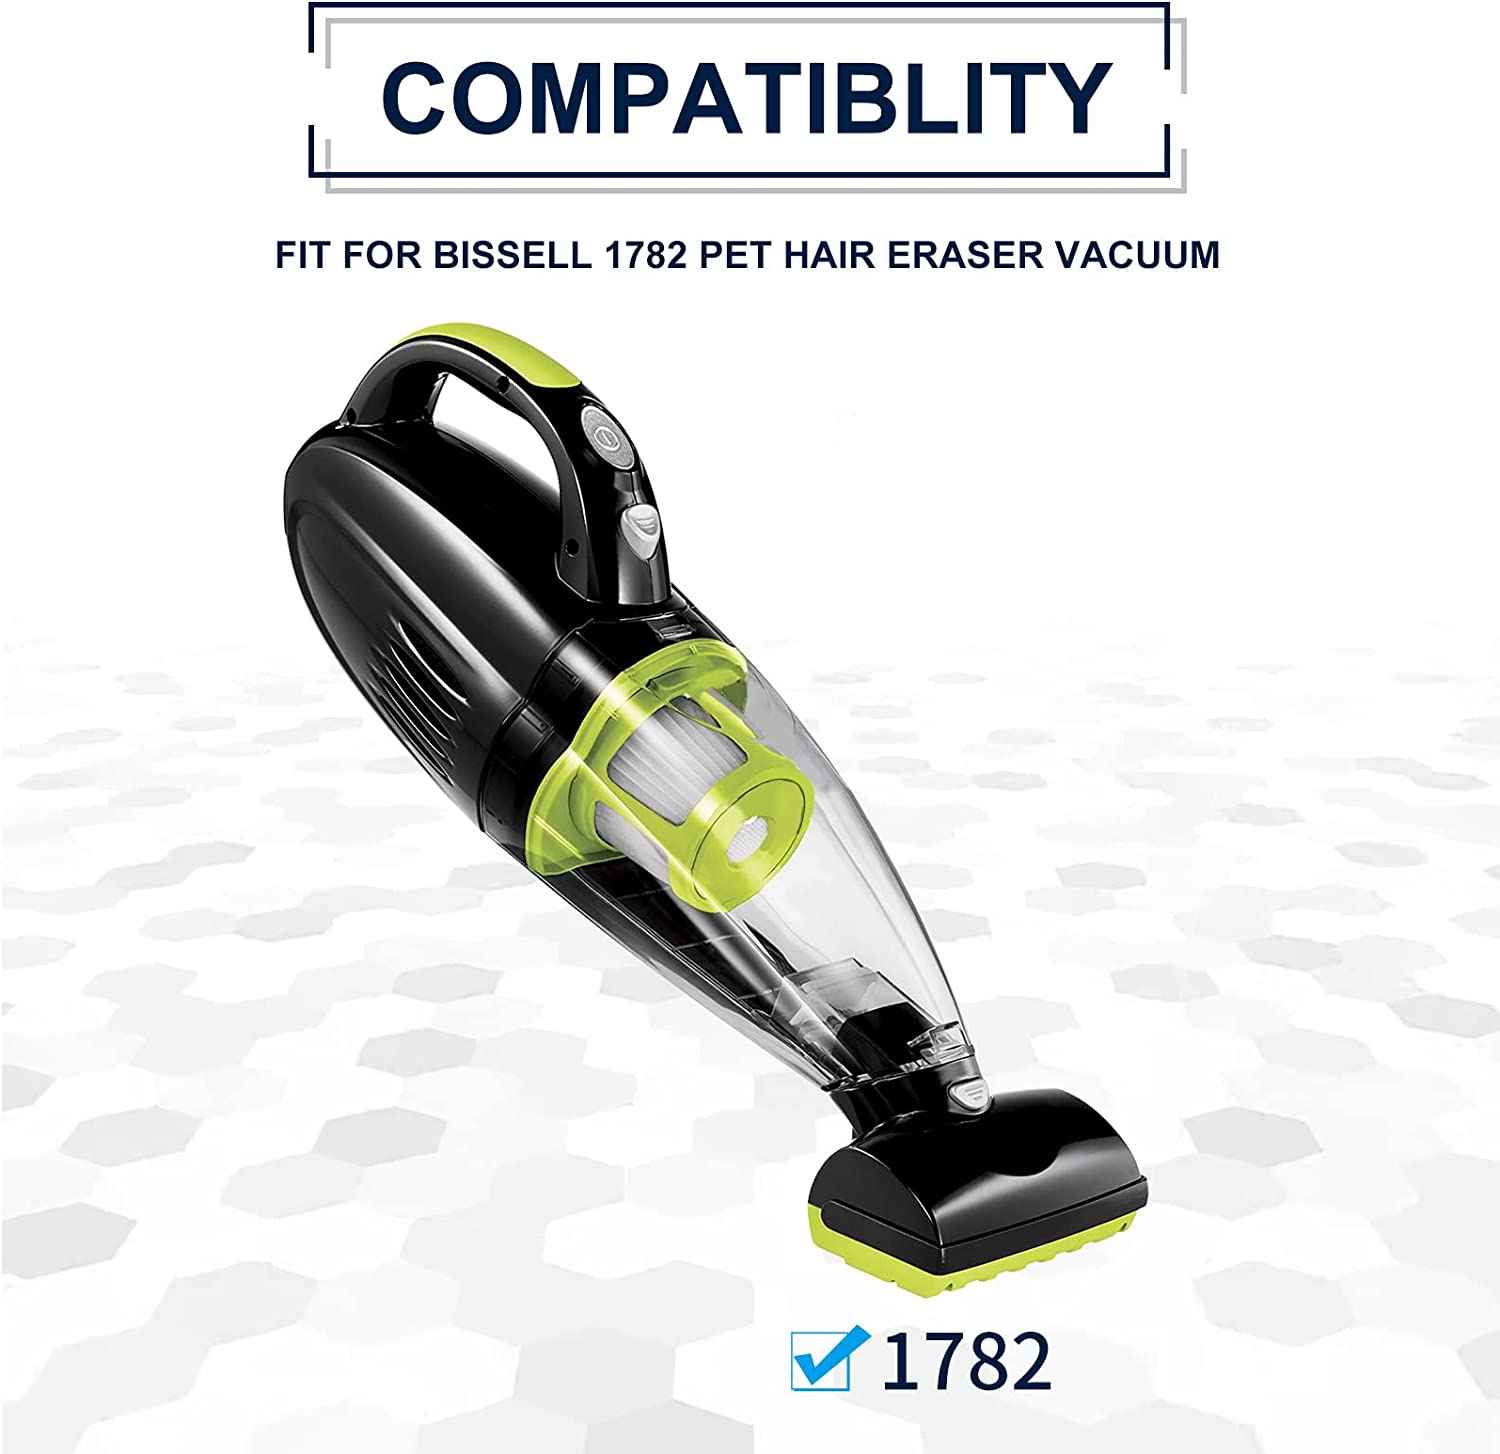 1782 Pet Hair Eraser Filter Compatible with Bissell 1782 Pet Hair Eraser Hand Vacuum, Compare to Part # 1608653 & 1608654, 2-Pack, By KEEPOW